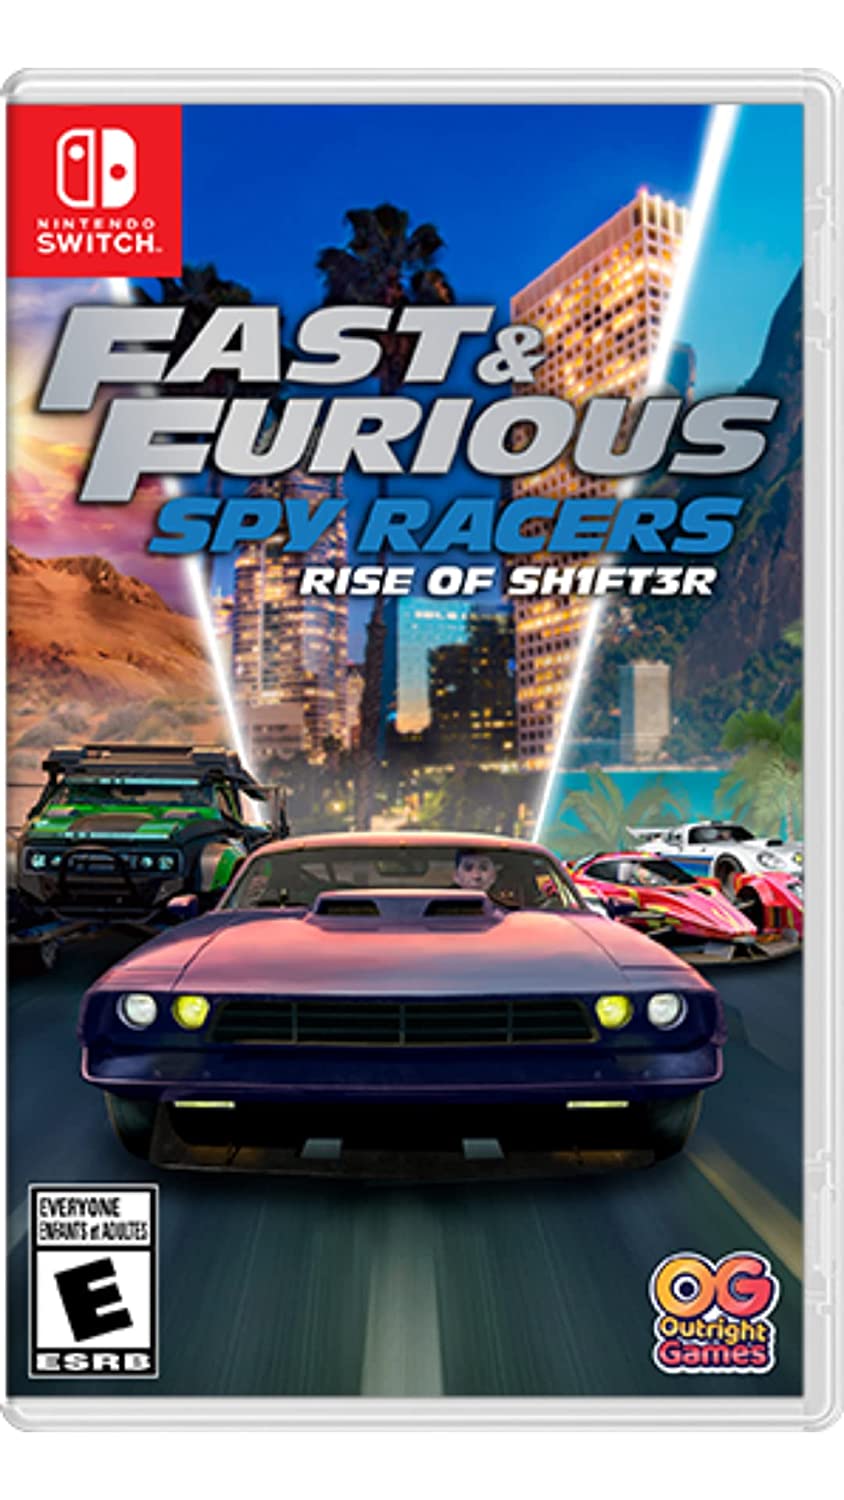 Fast & Furious Spy Racers Rise of SH1FT3R - Nintendo Switch